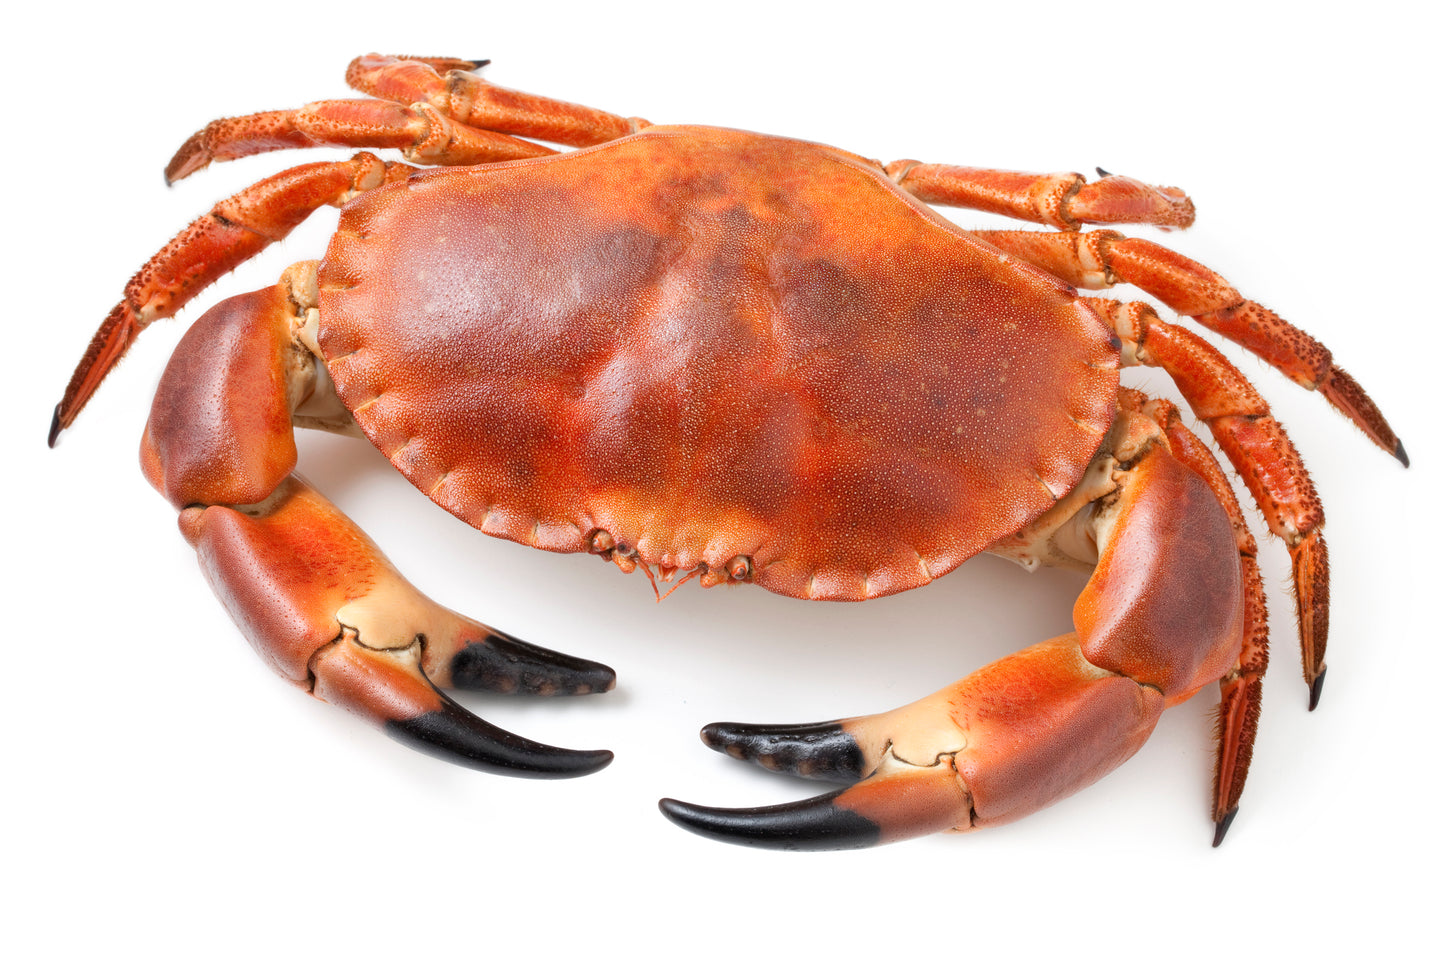 Whole Cock Crab 1-1.2Kg